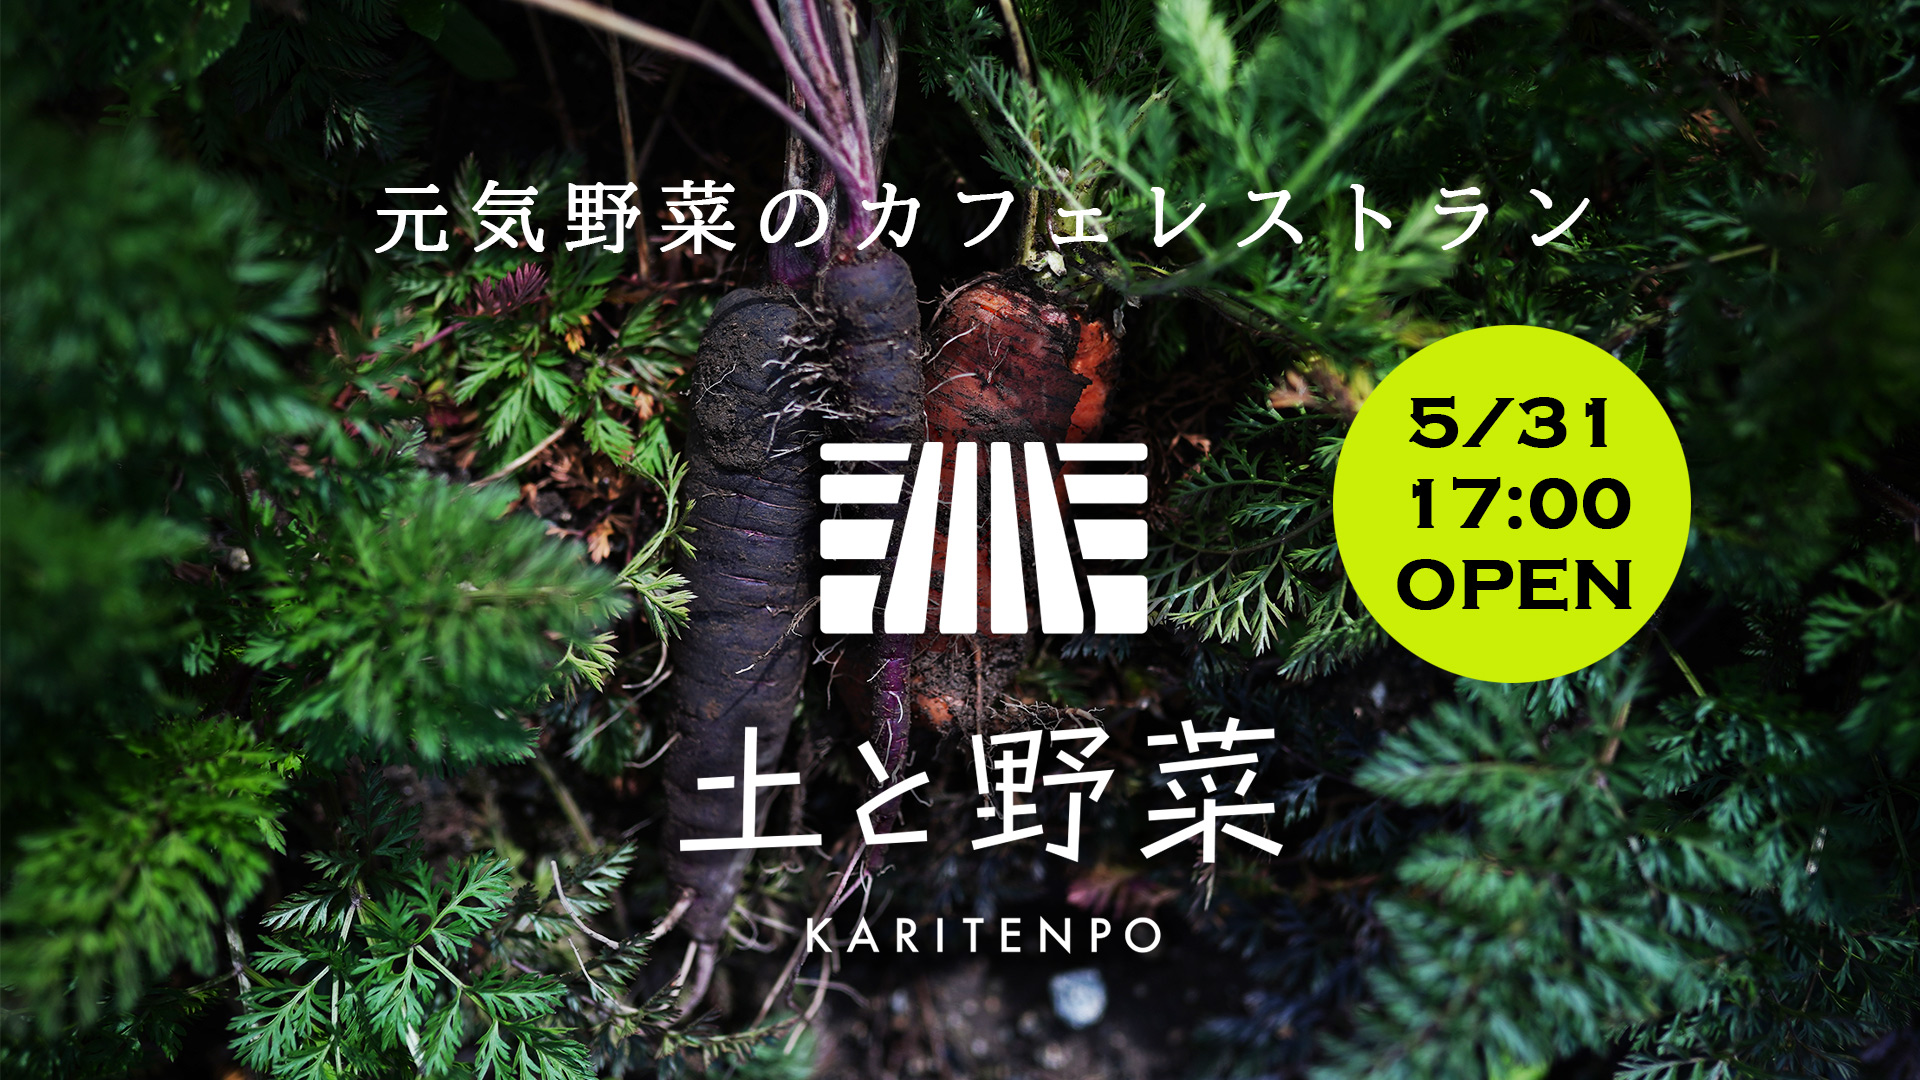 You are currently viewing 元気野菜のカフェレストラン [土と野菜 KARITENPO] 京都にOPEN!!